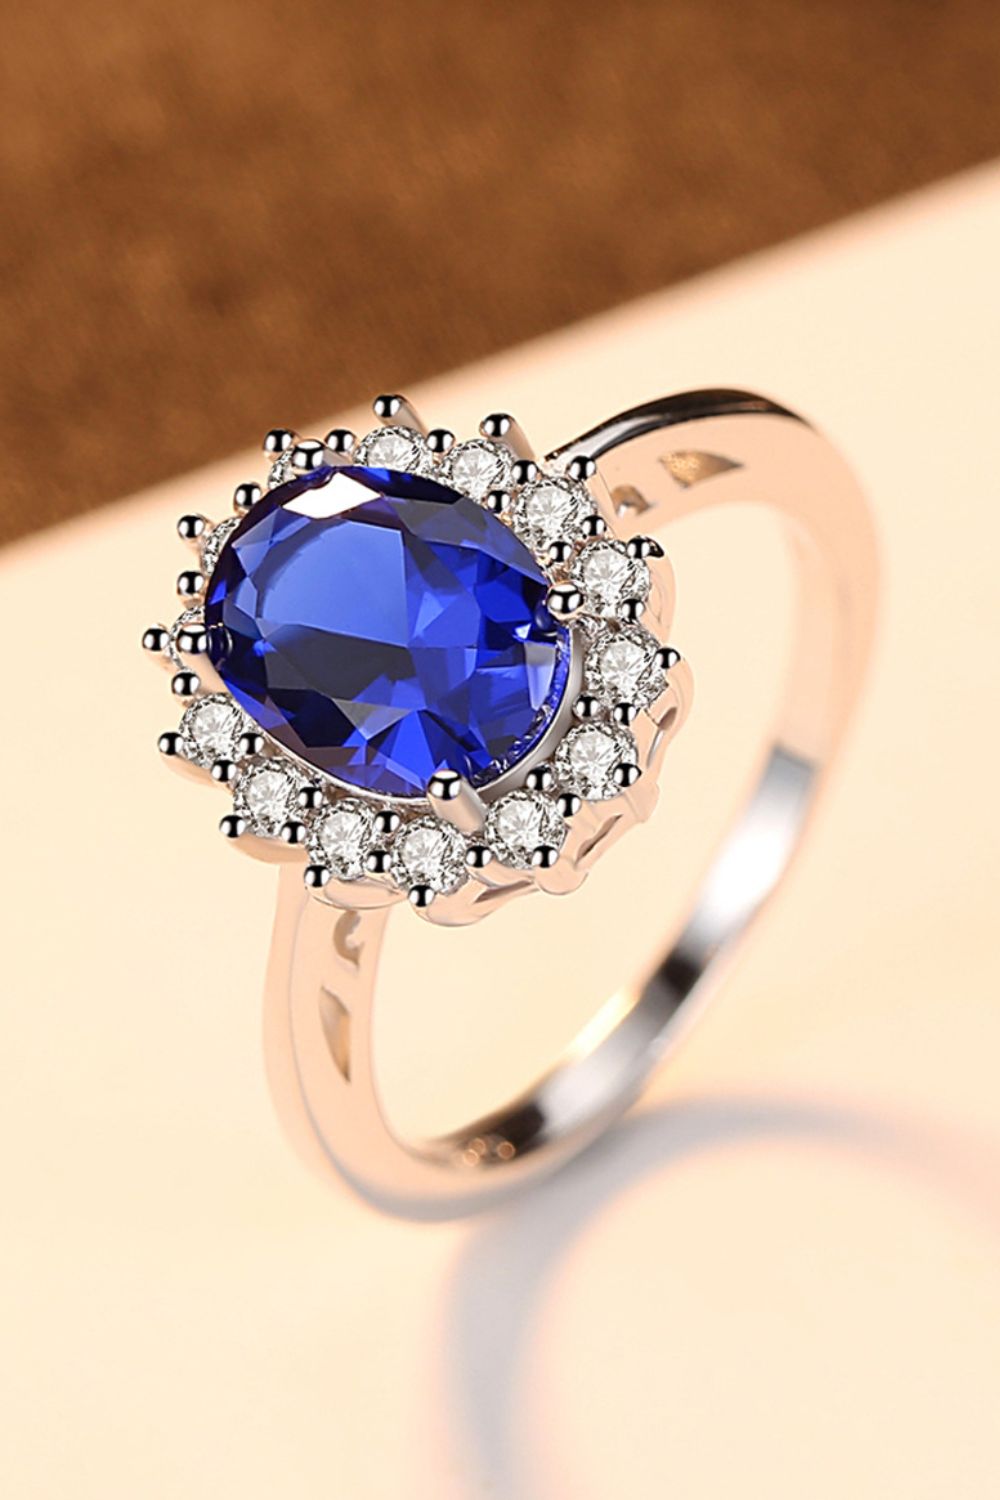 Synthetic Sapphire 925 Sterling Silver Ring - bertofonsi